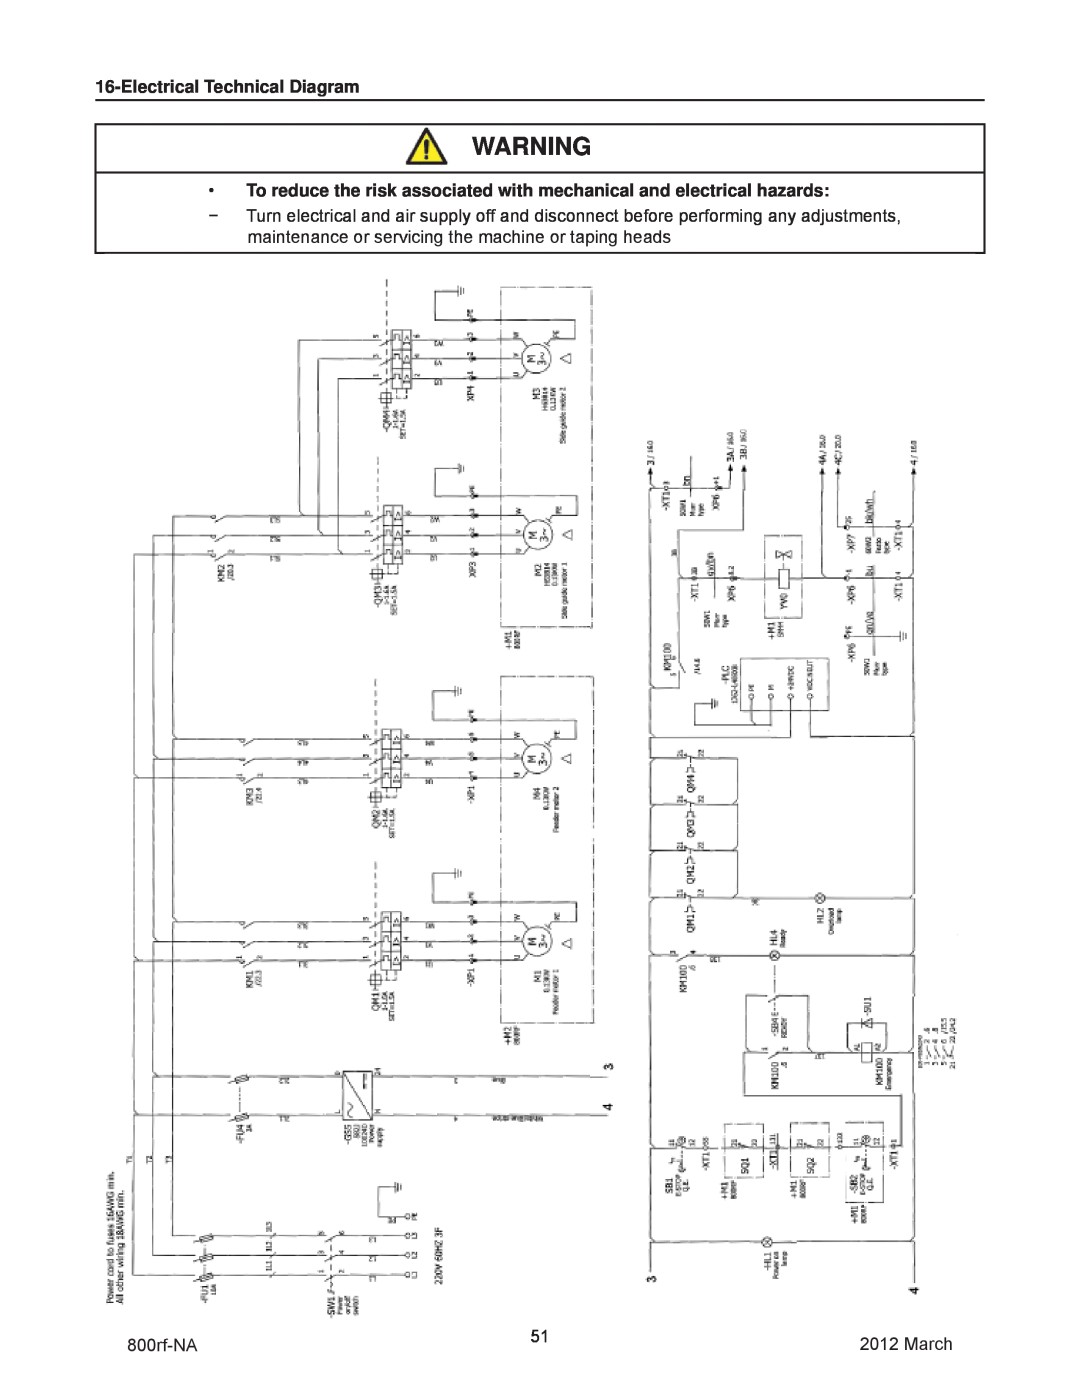 3M Electrical Technical Diagram, To reduce the risk associated with mechanical and electrical hazards, 800rf-NA, March 